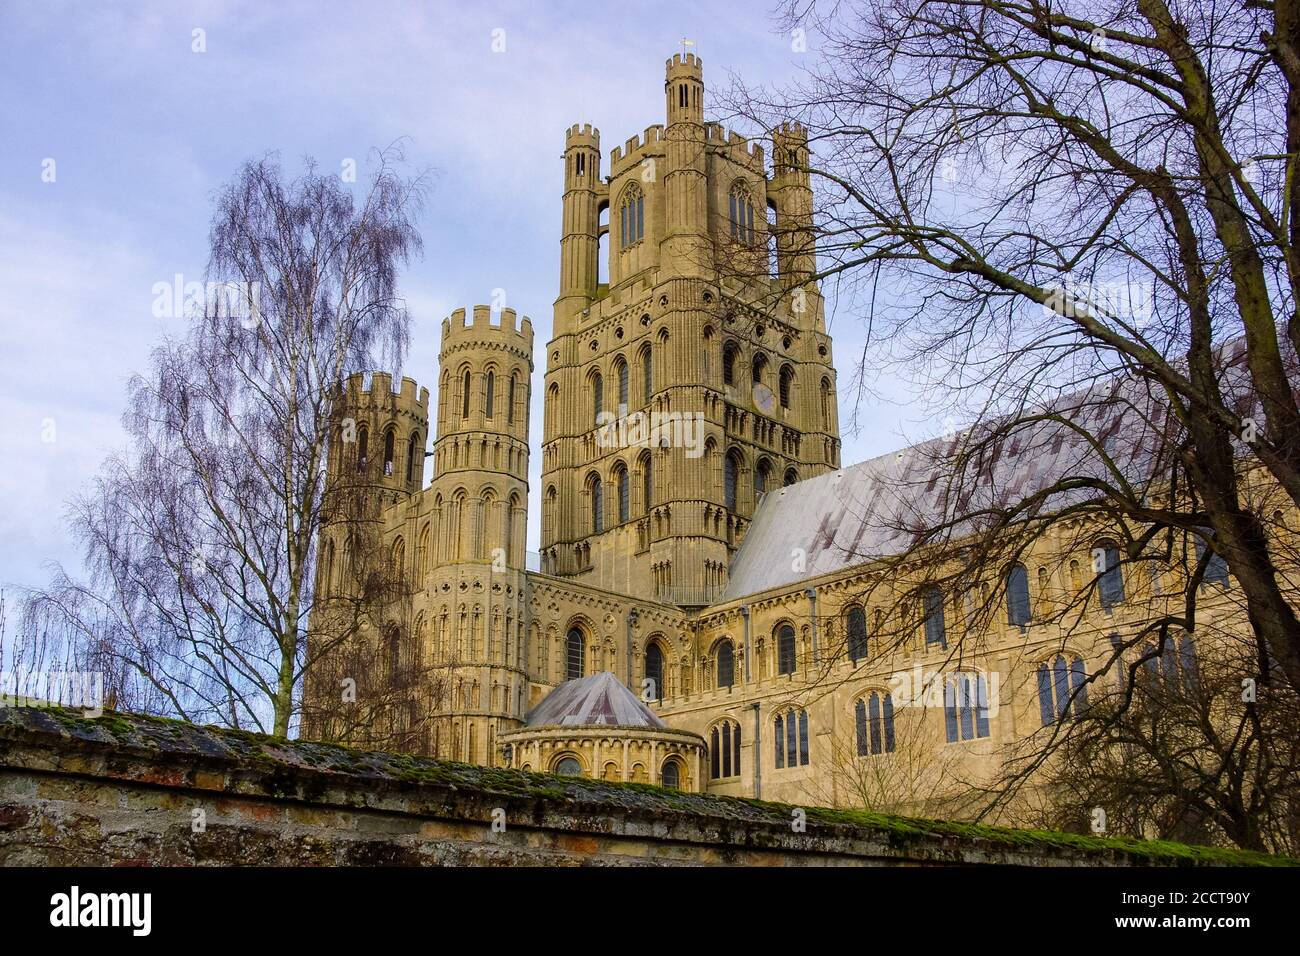 Ely Kathedrale aus dem Canonry Stockfoto